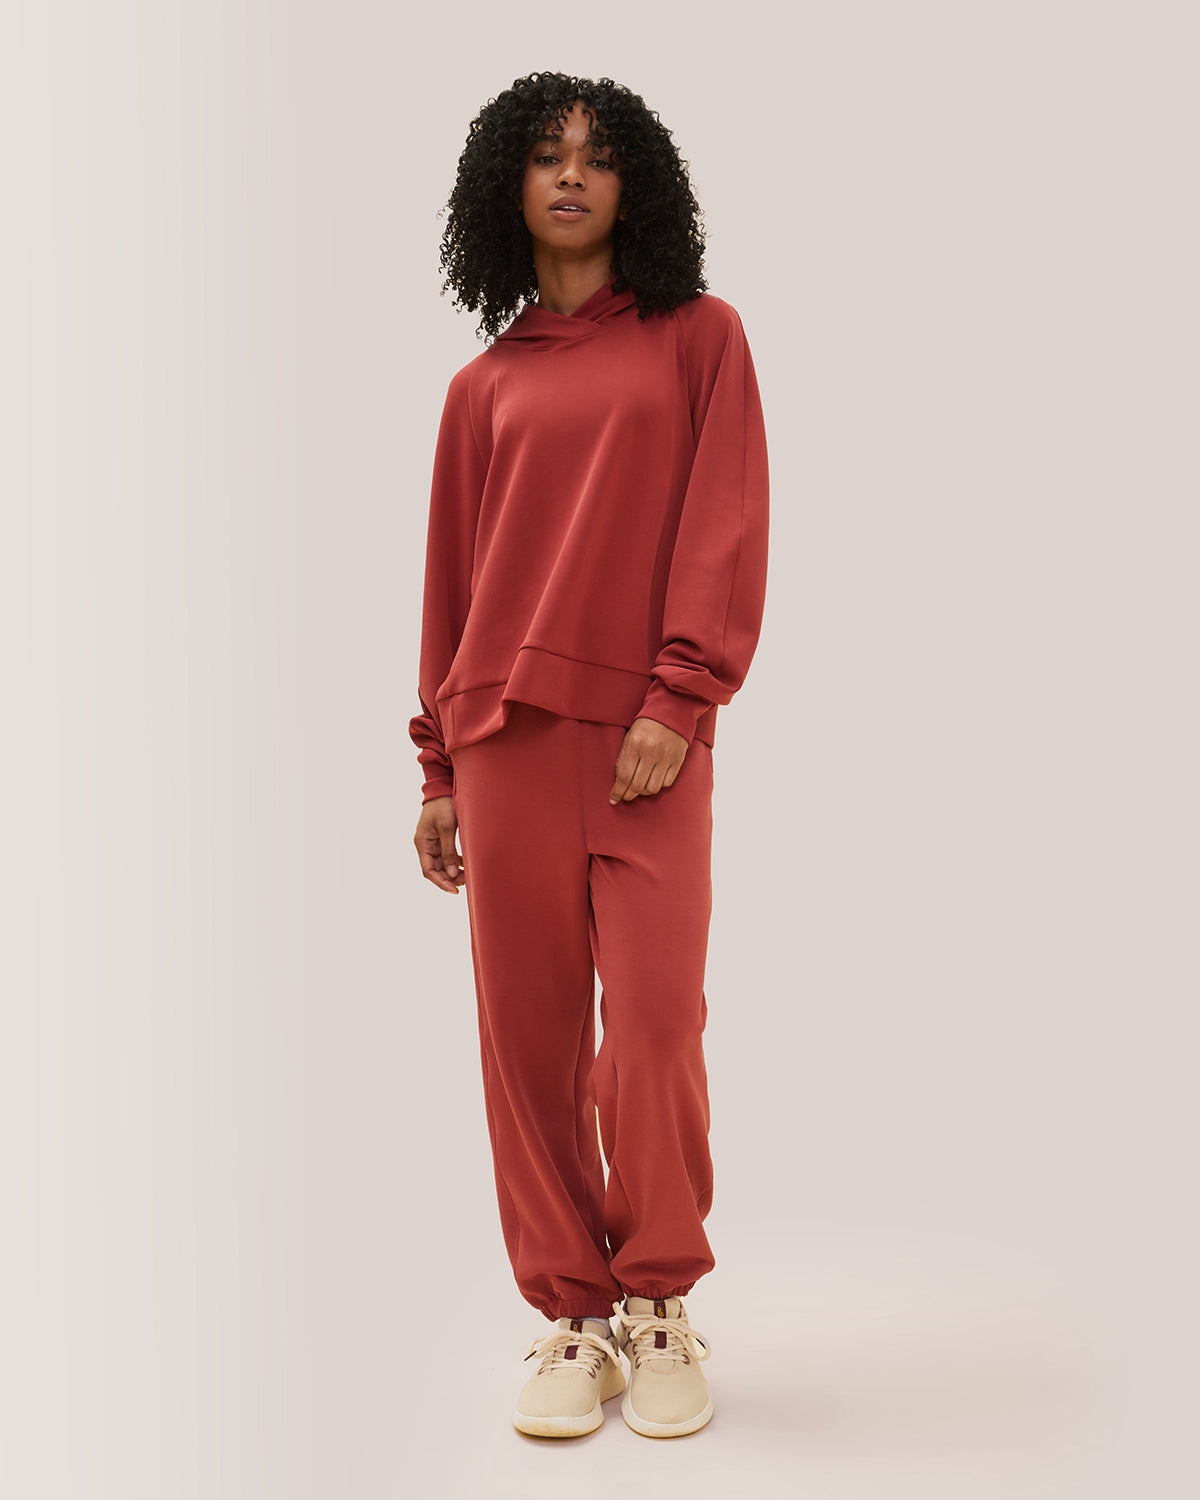 Edelweisse Jogger Pants Rose Boreal -Rubis